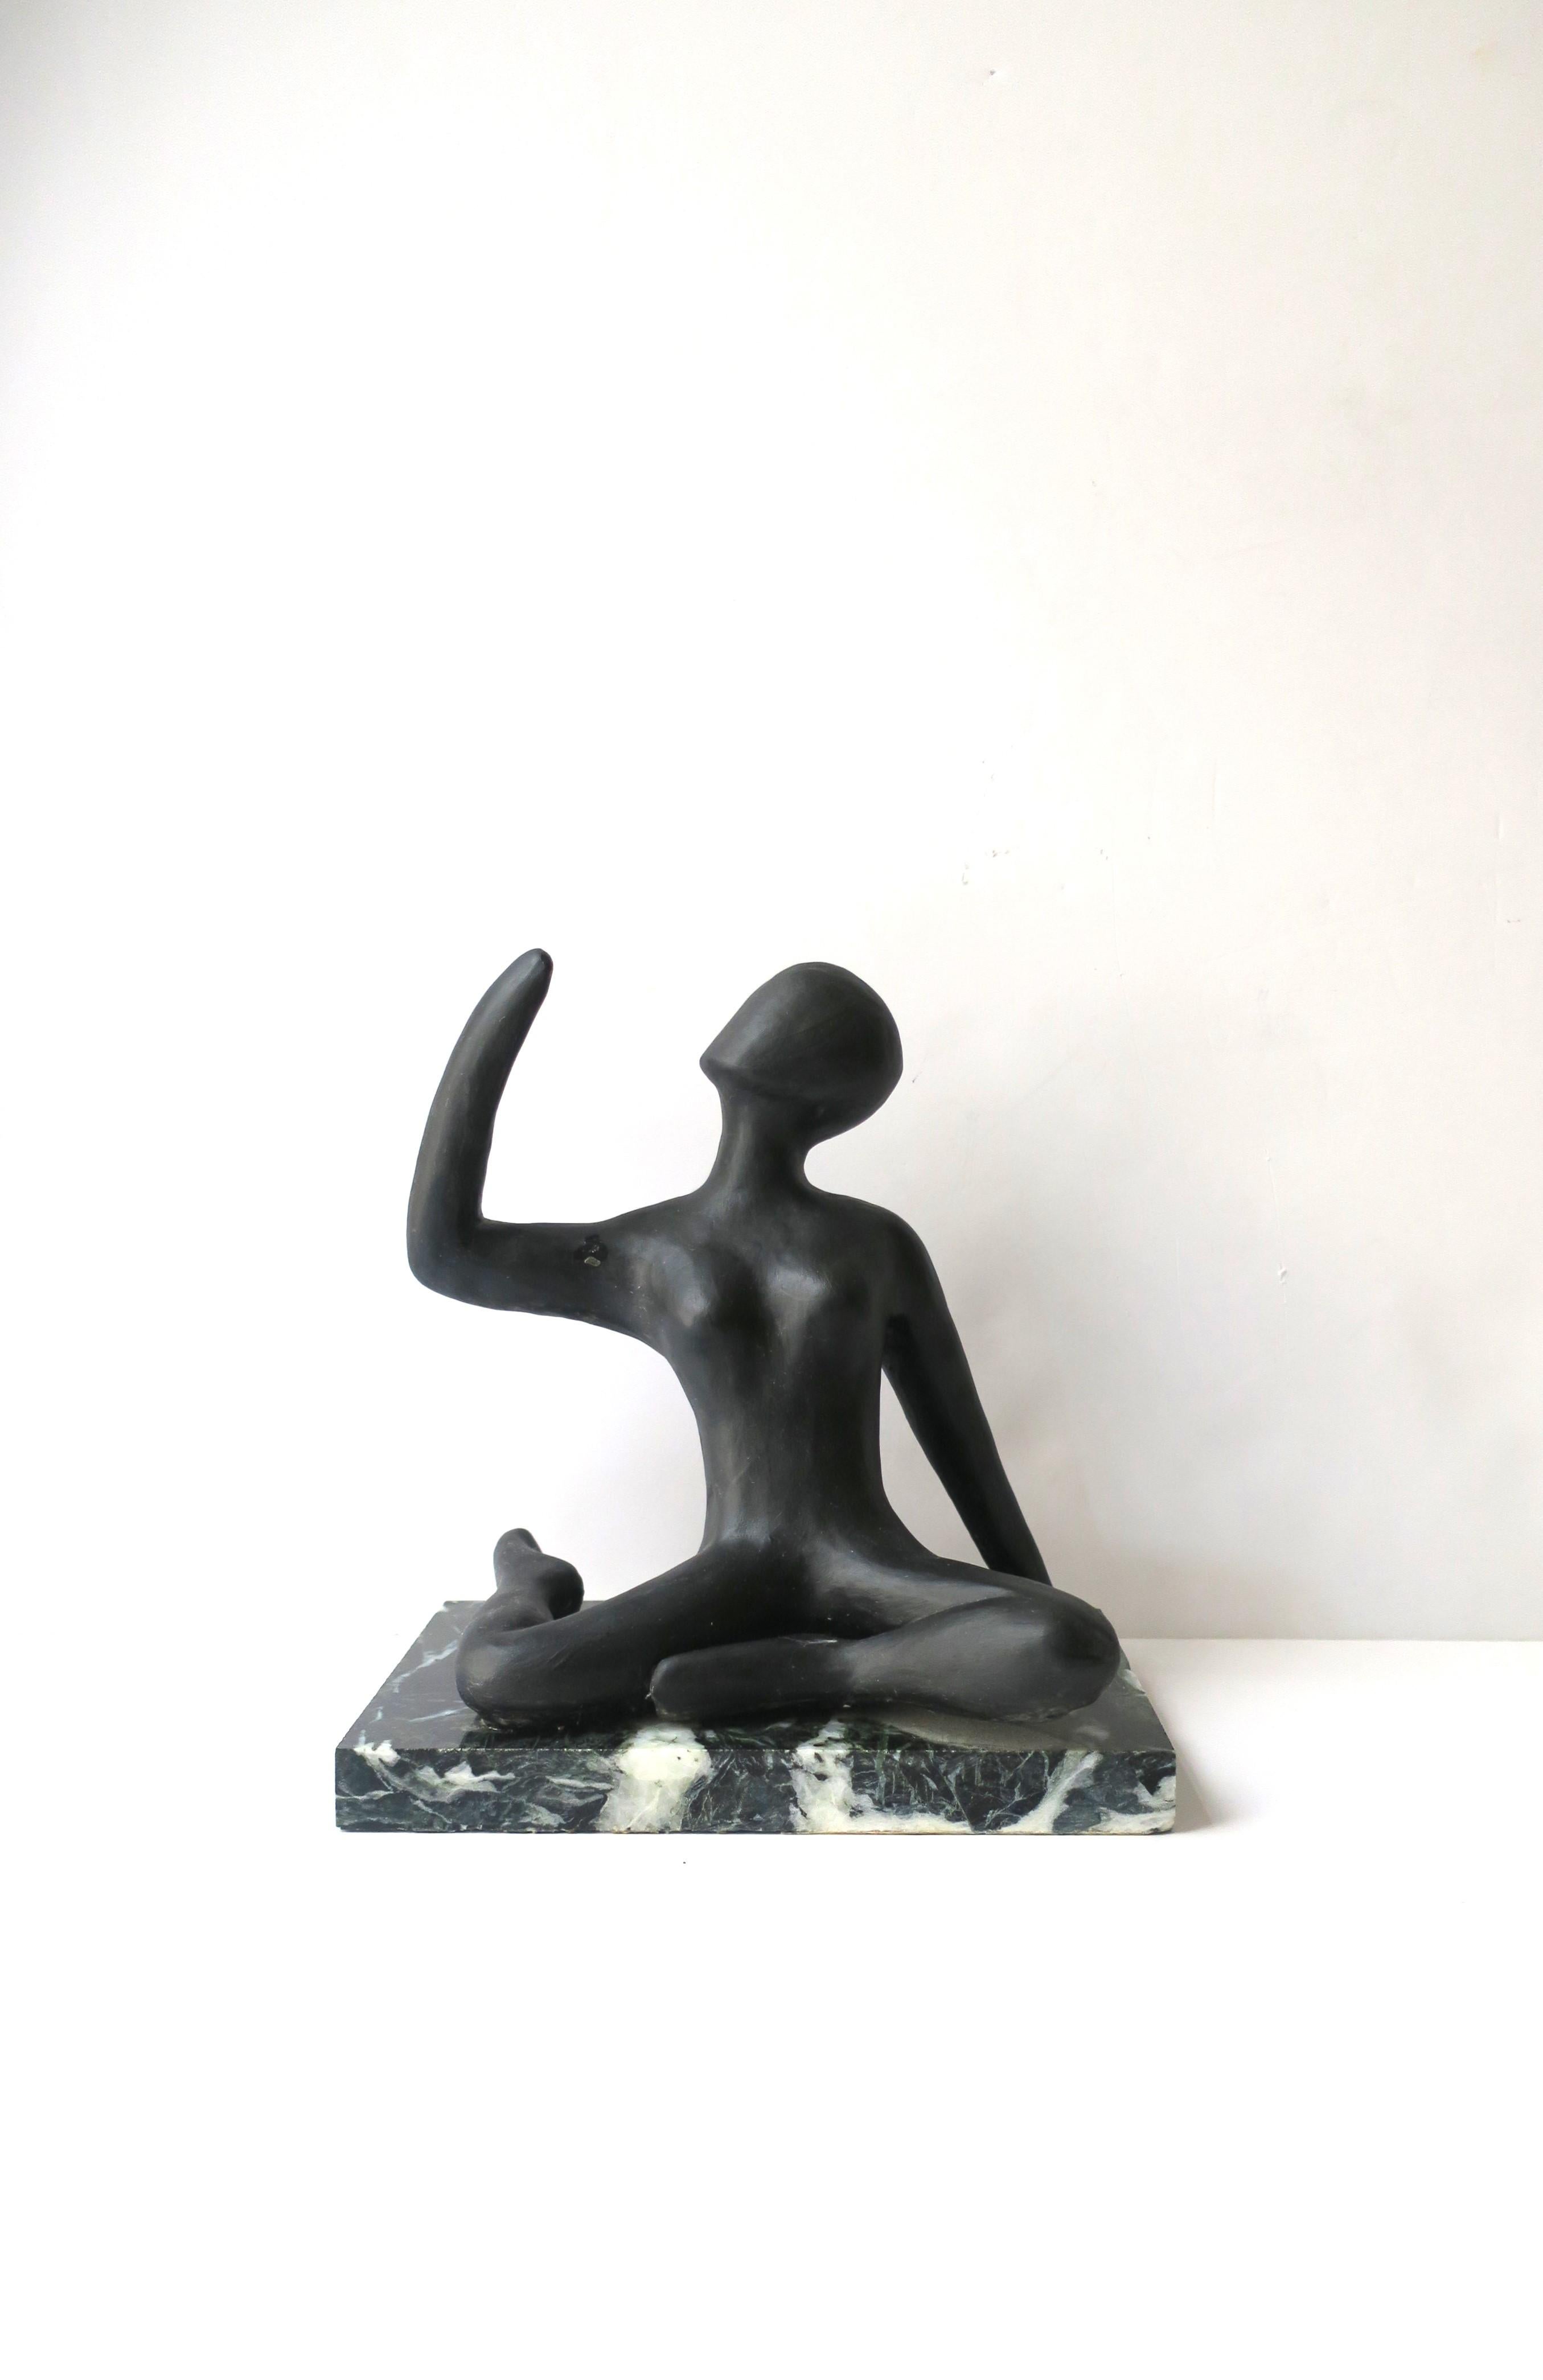 A substantial ceramic female figurative sculpture on marble base, circa mid-20th century. Female figure is ceramic with a black finish, sitting in flexible position, on a dark green and white marble base. A great piece for a bookshelf, on top of